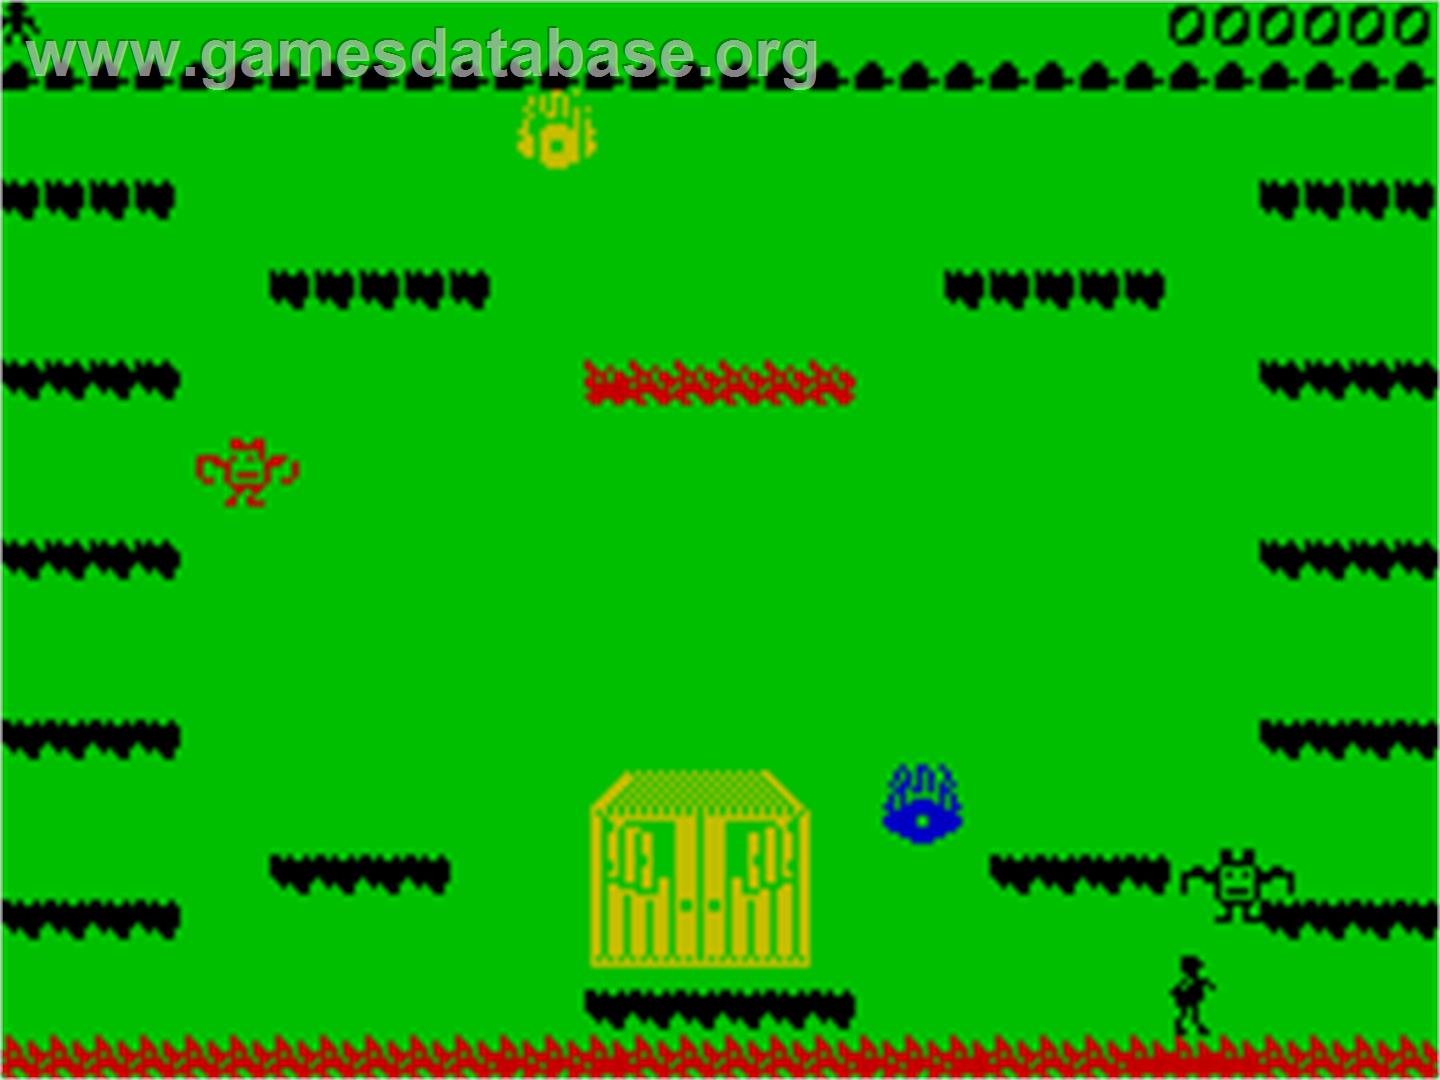 Hercules: Slayer of the Damned - Sinclair ZX Spectrum - Artwork - In Game